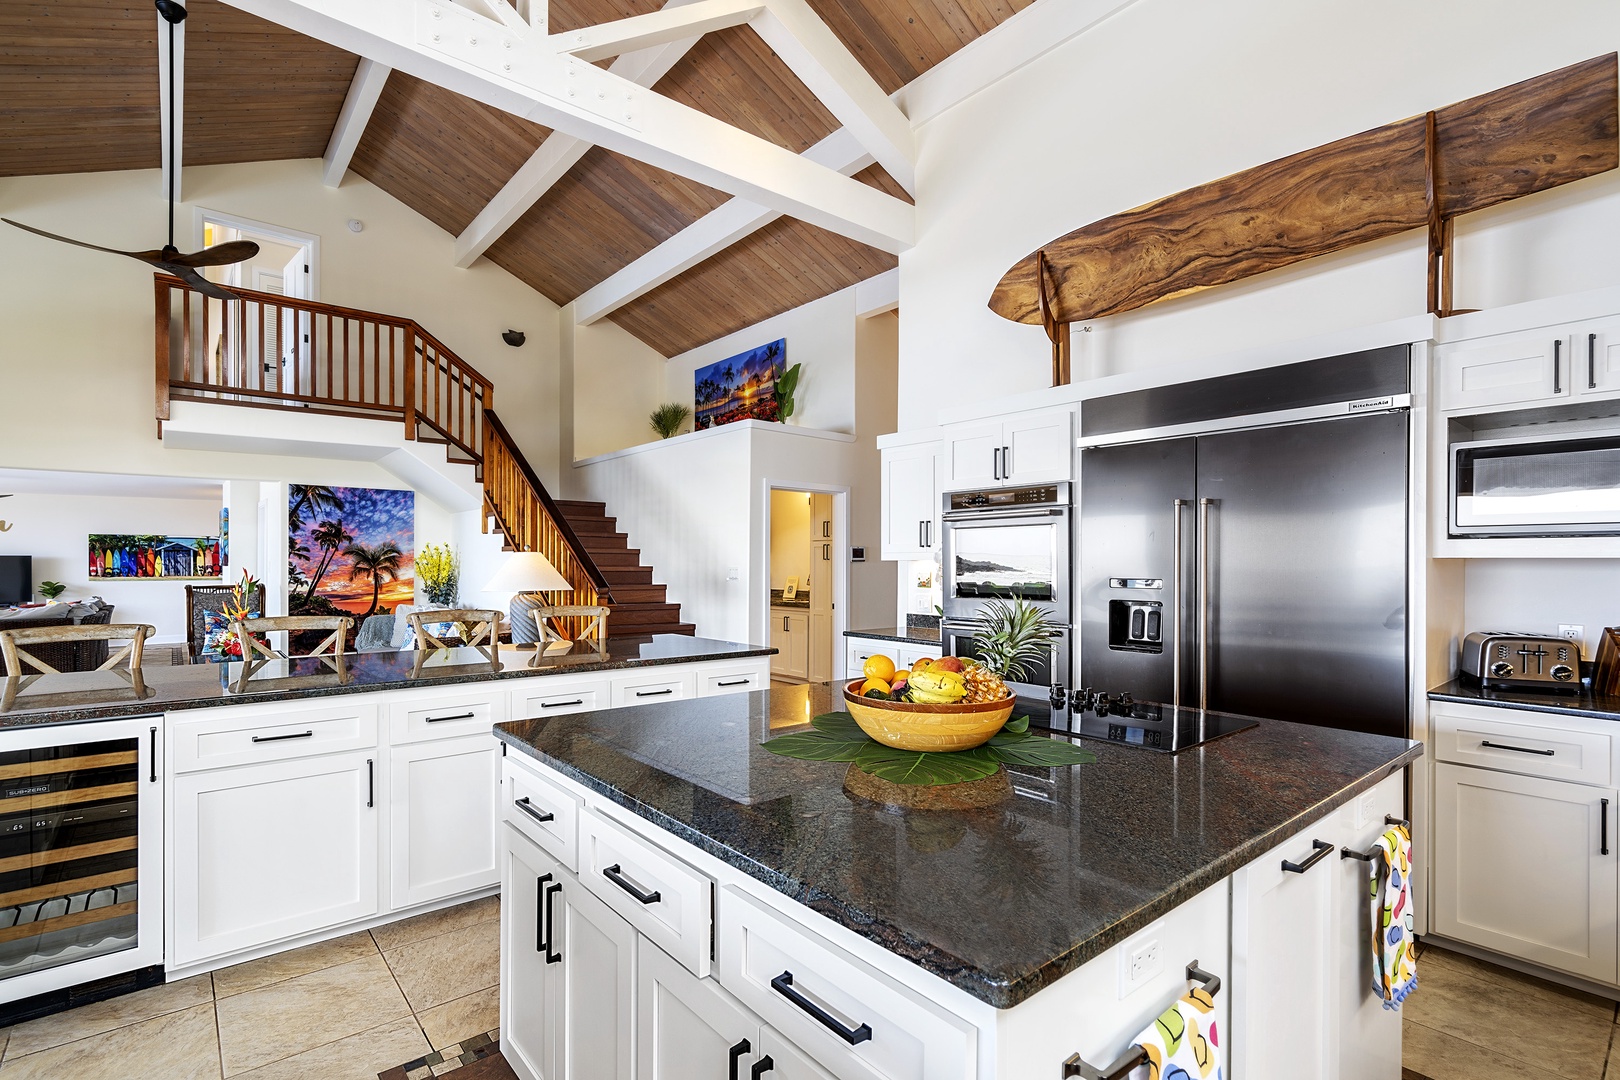 Kailua Kona Vacation Rentals, Hale Pua - From the kitchen you can see clear into the living room